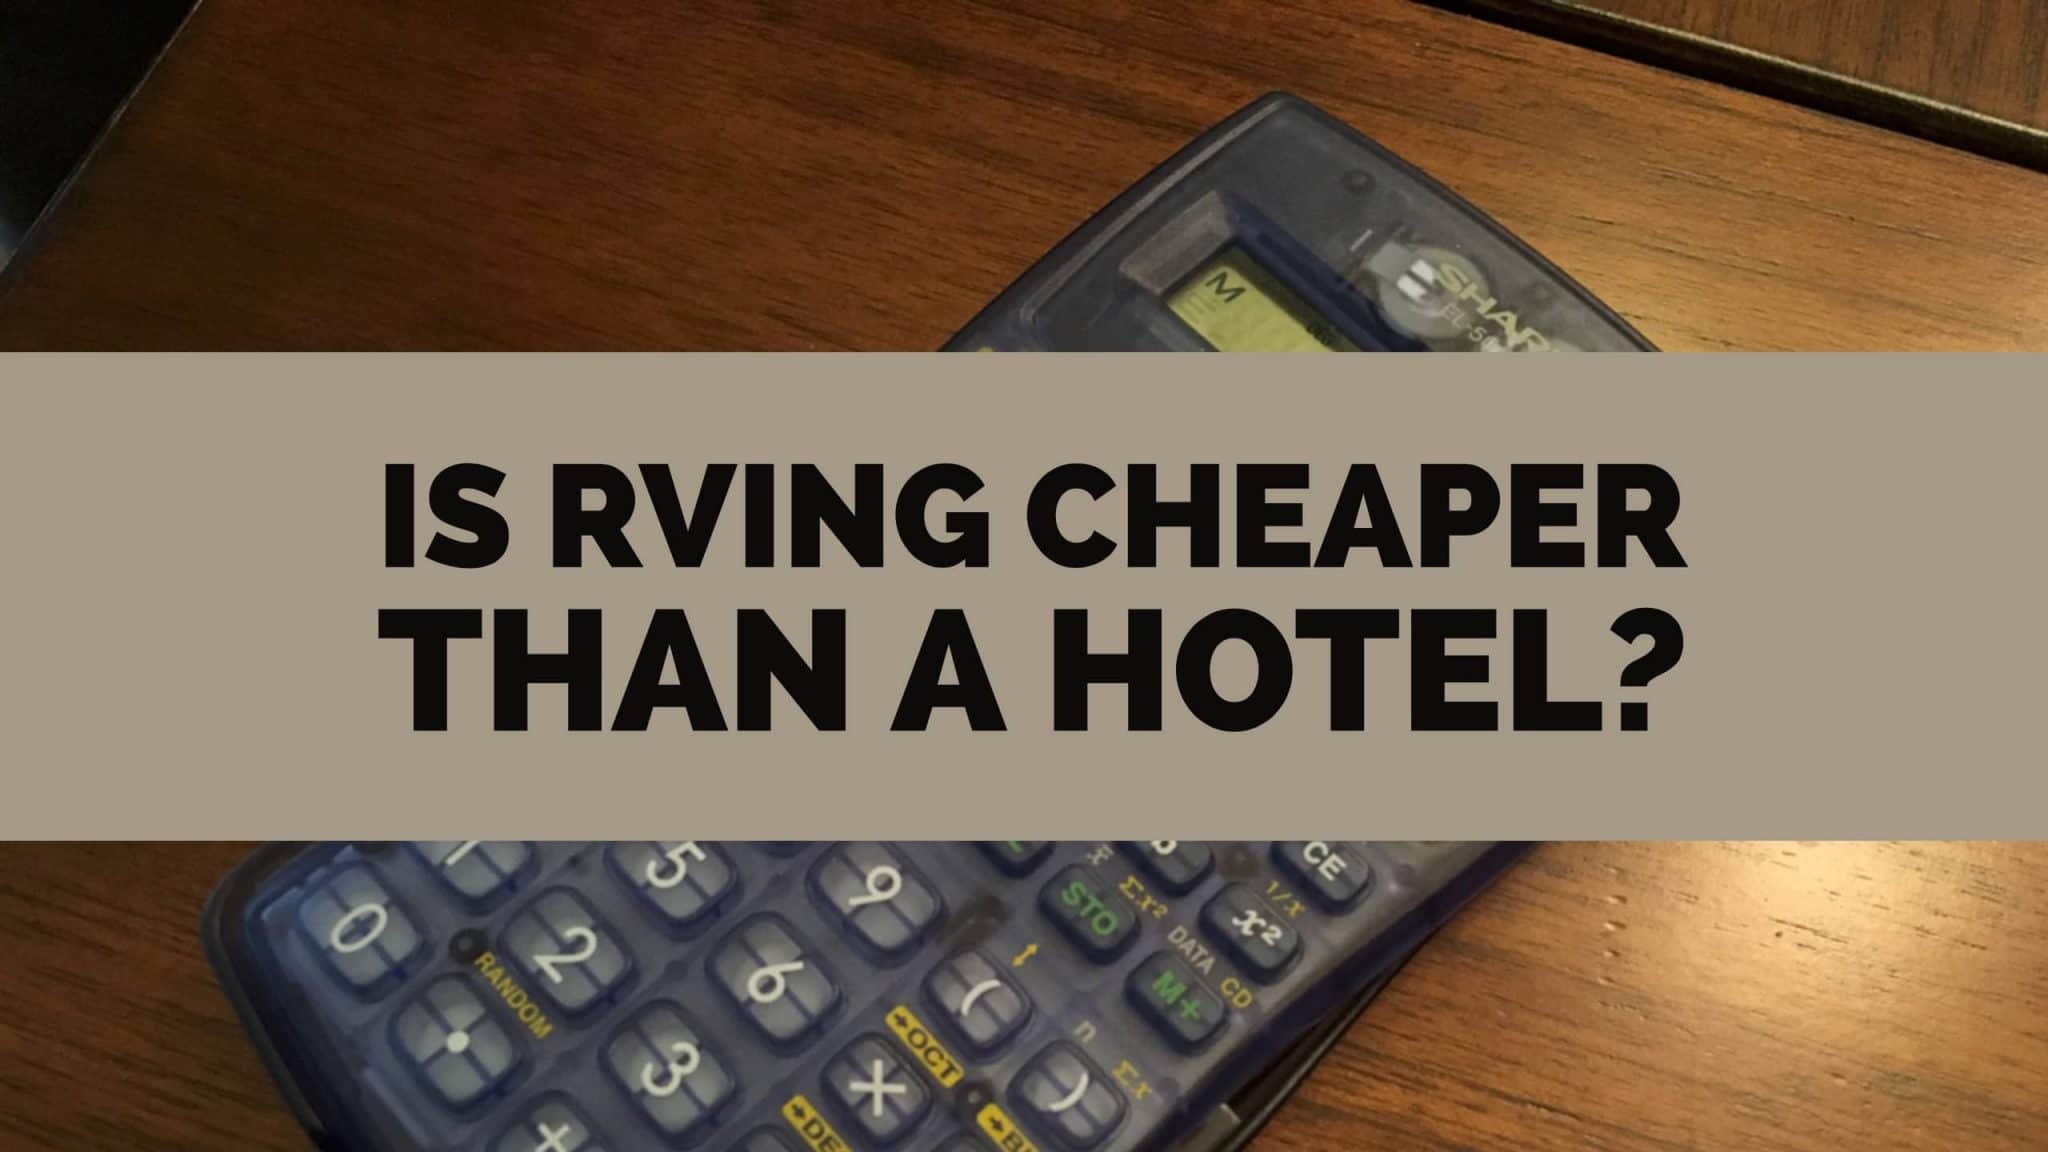 Is RVing Cheaper Than a Hotel?